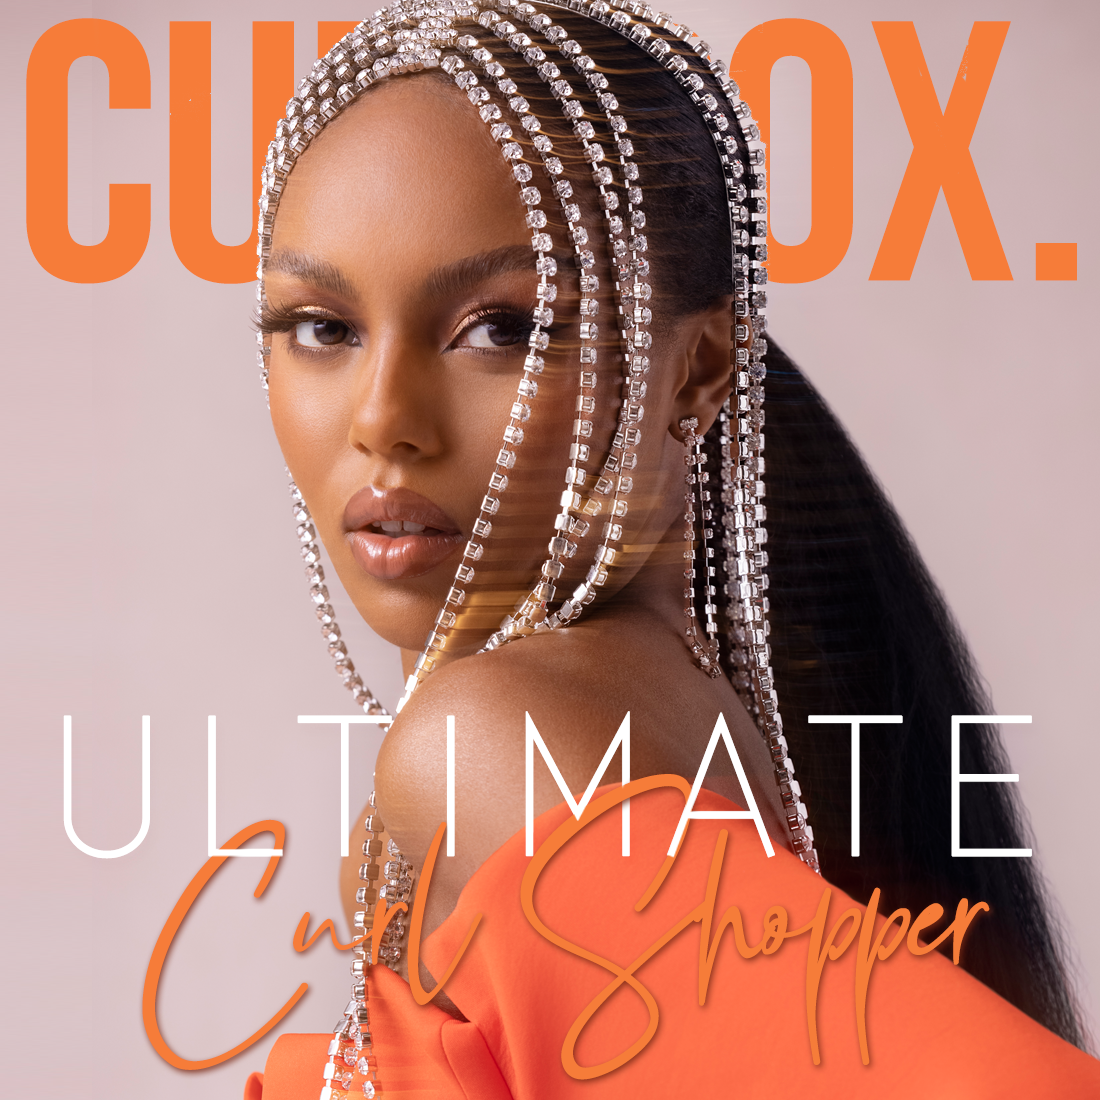 CURLBOX x ULTA Limited Edition Box – Available Now